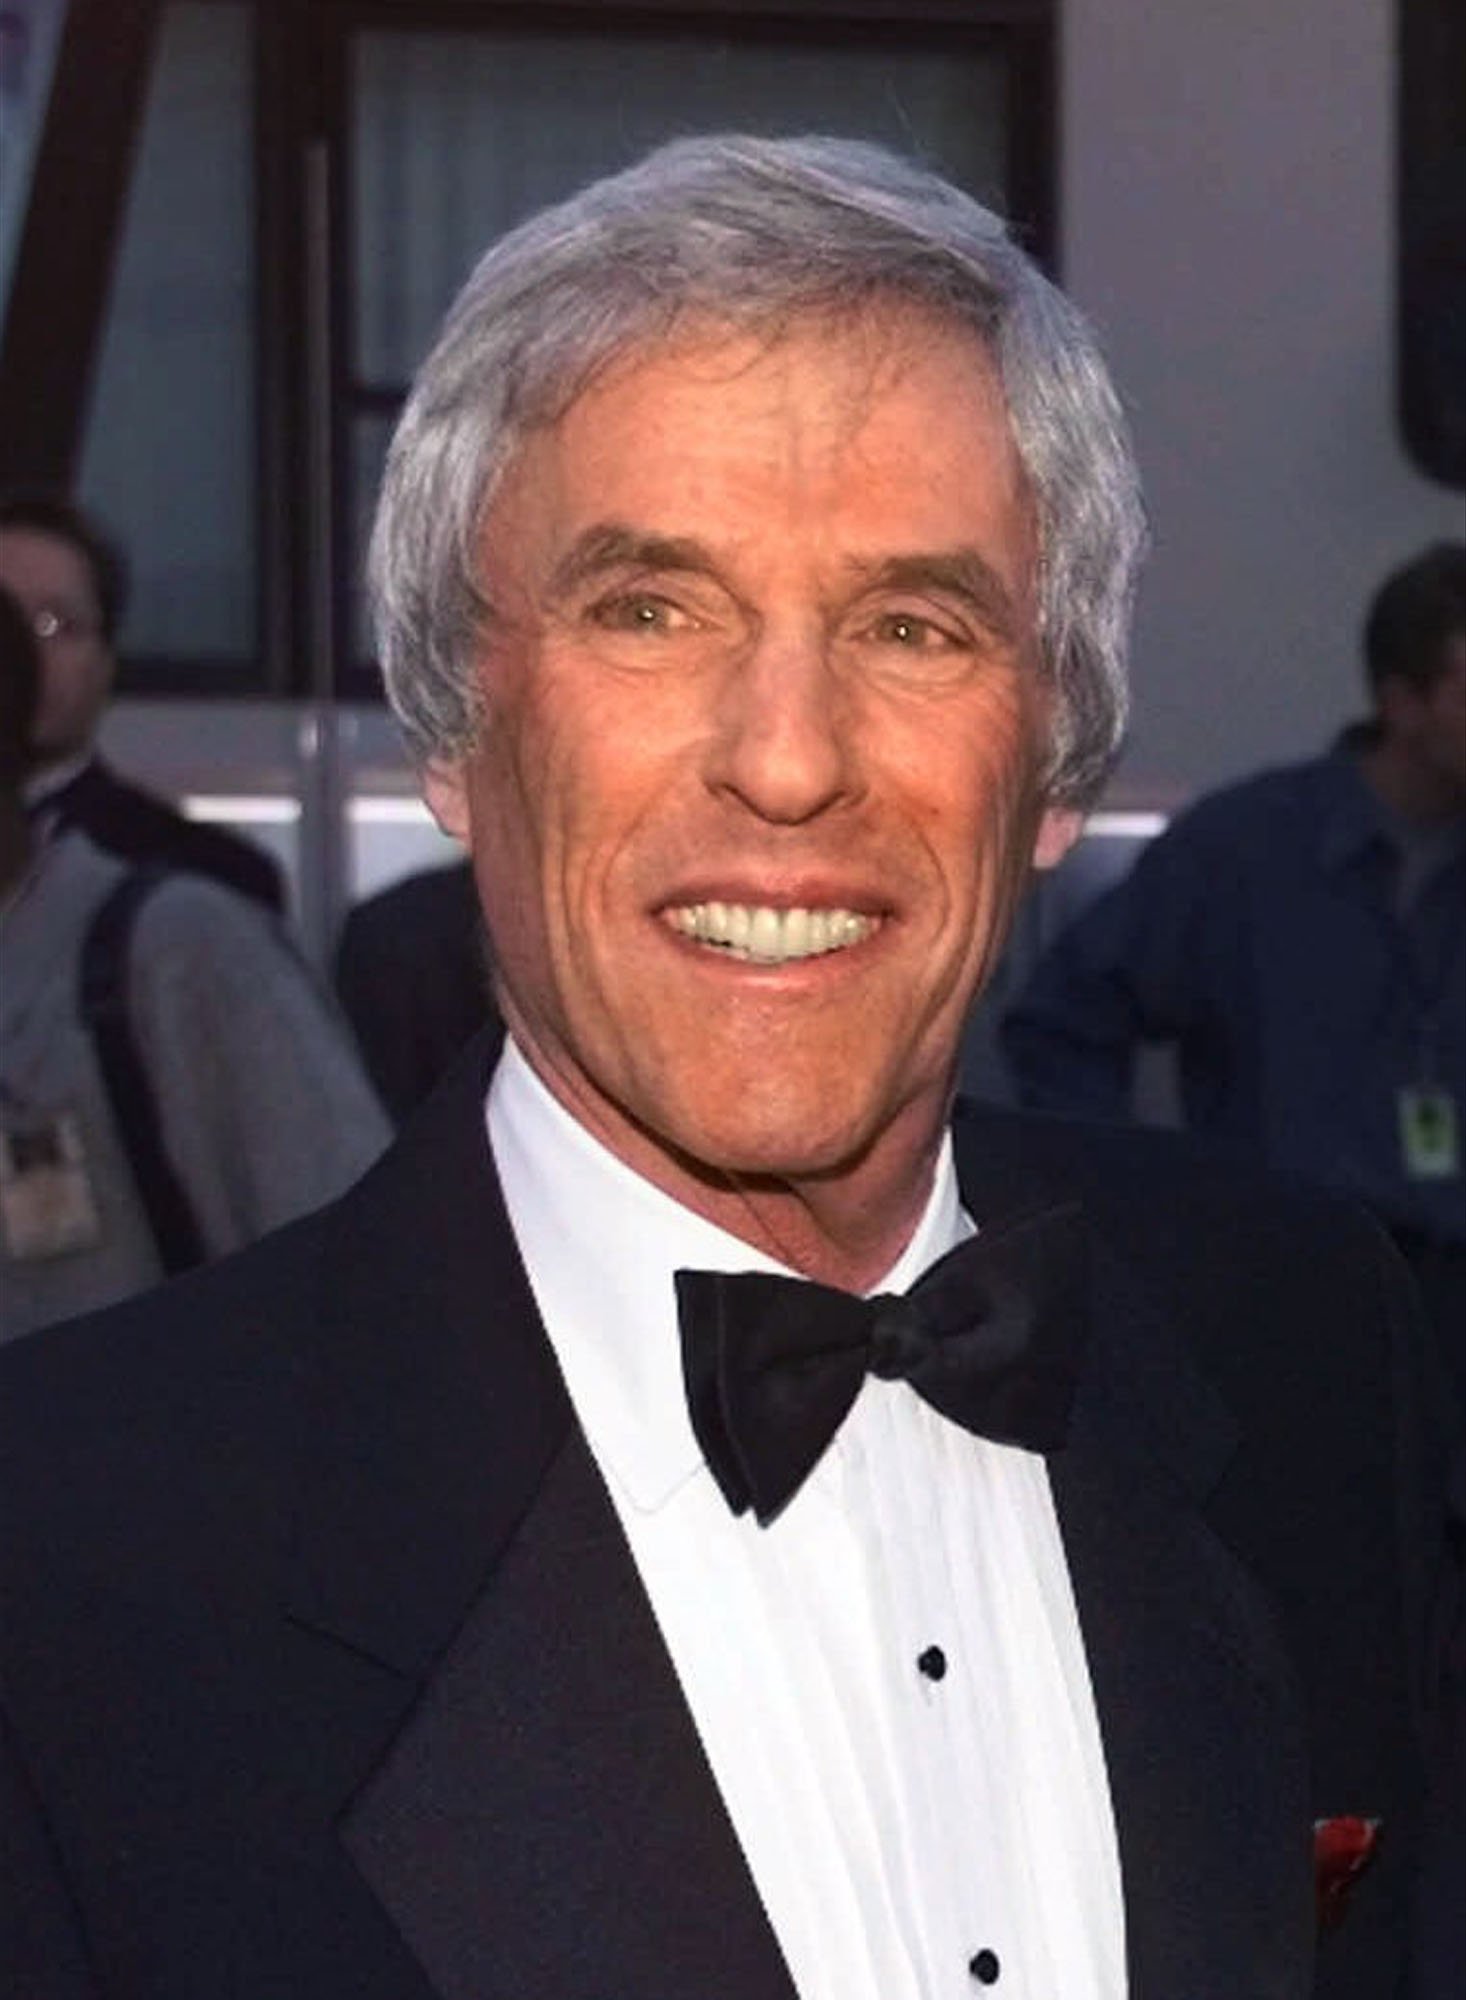 Burt Bacharach died aged 94 at his home in Los Angeles